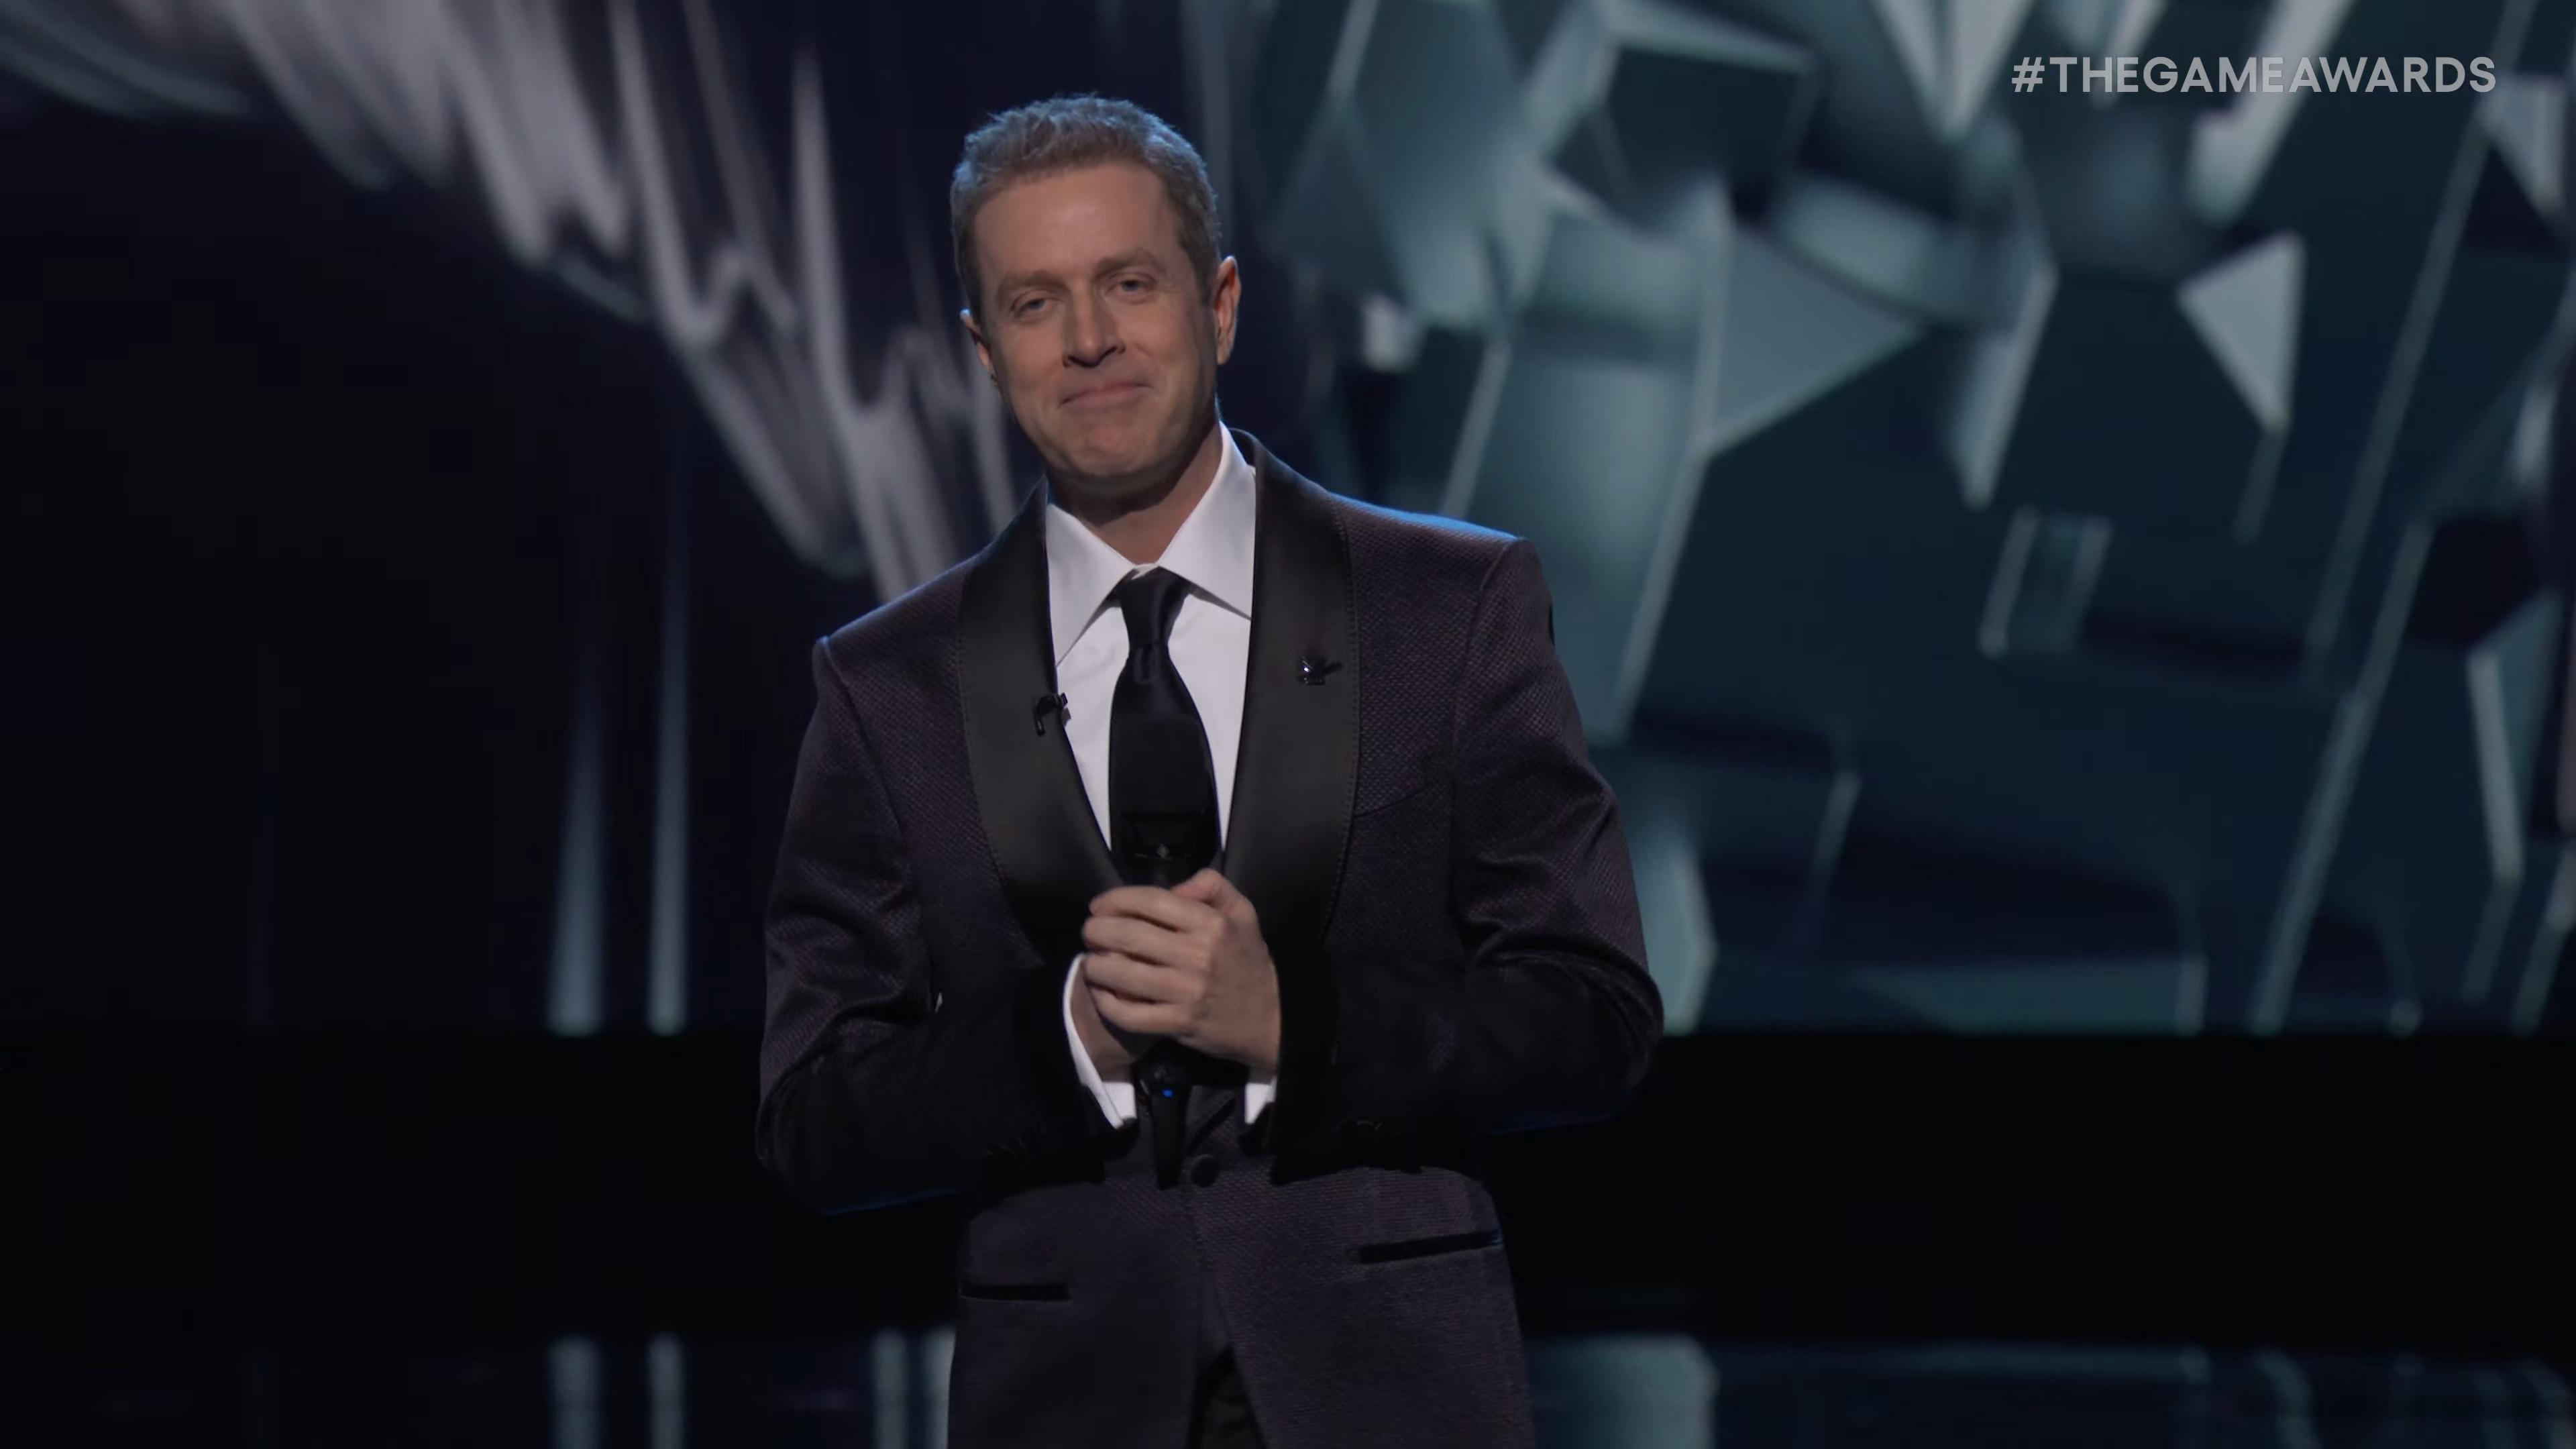 The Game Awards on X: Introducing Player's Voice, a